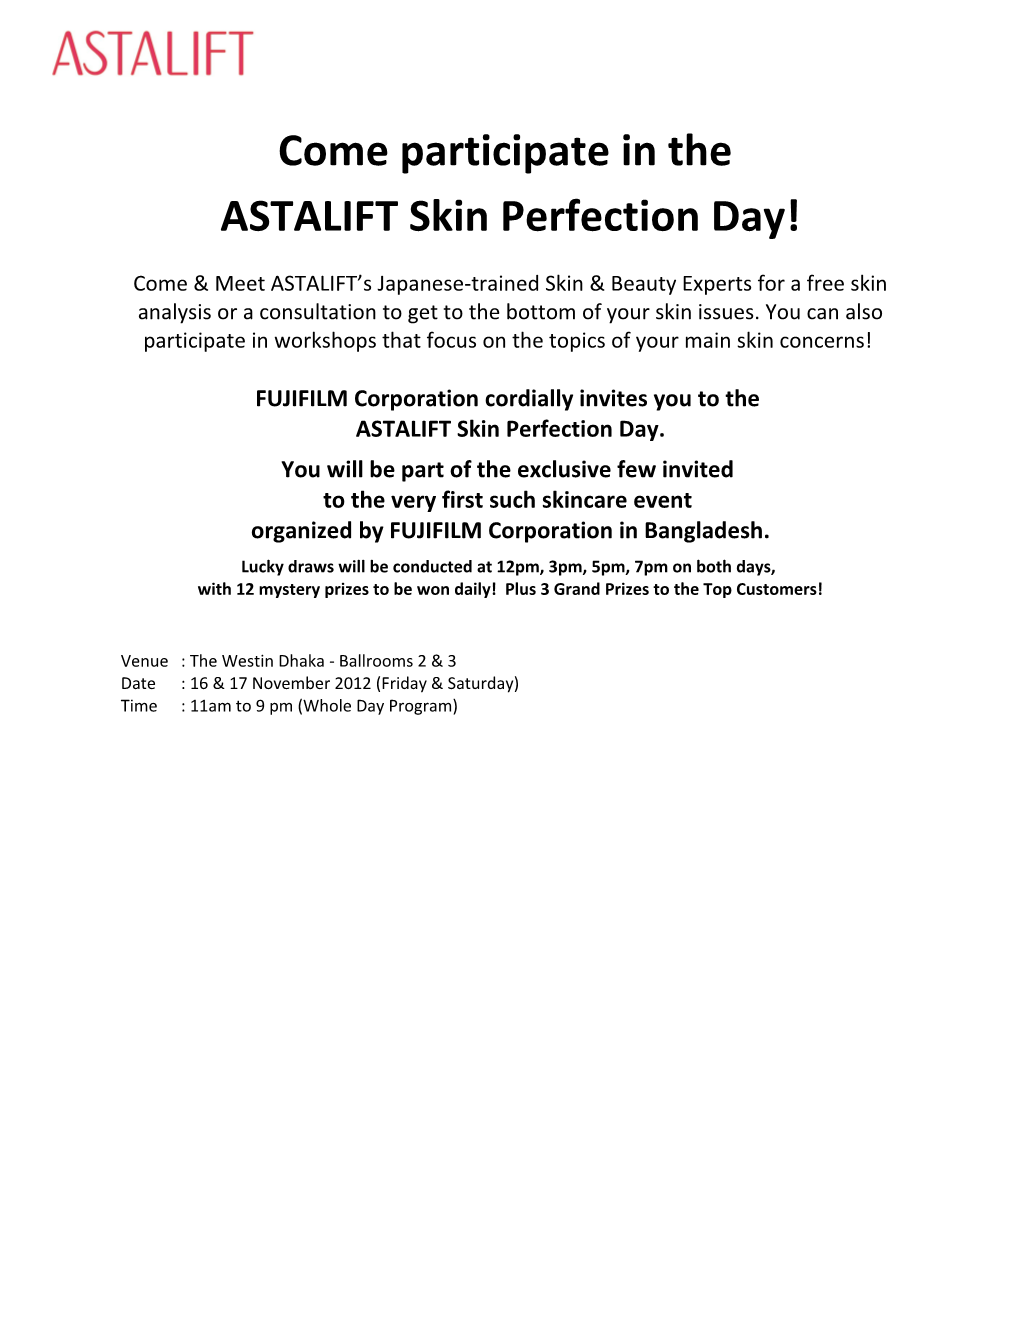 Come Participate in the ASTALIFT Skin Perfection Day!